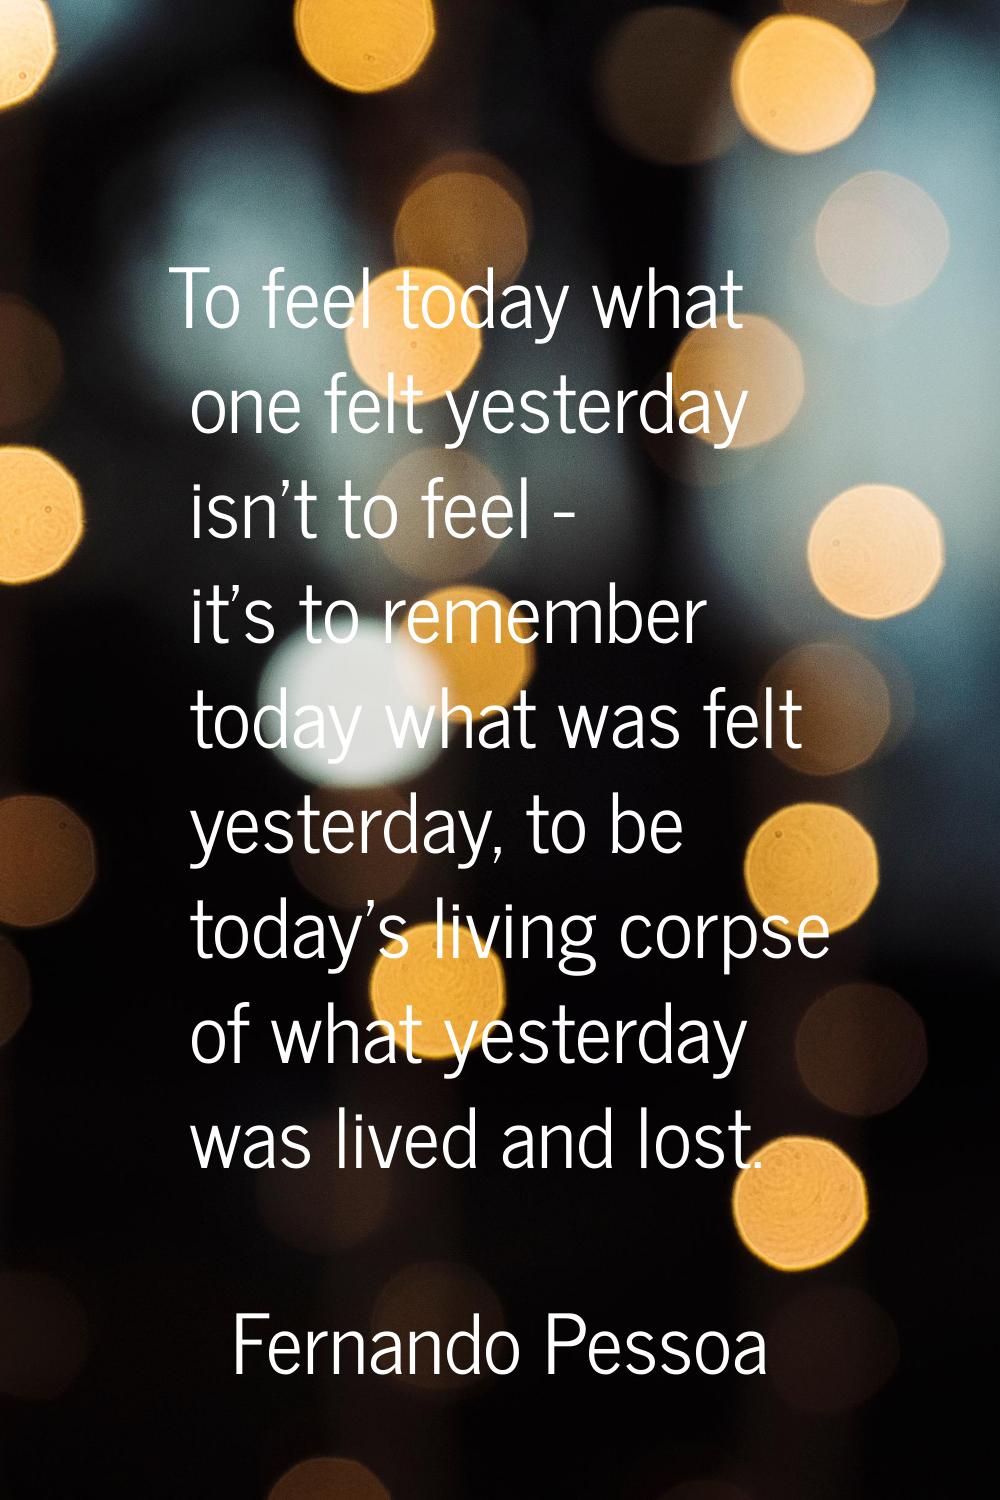 To feel today what one felt yesterday isn't to feel - it's to remember today what was felt yesterda